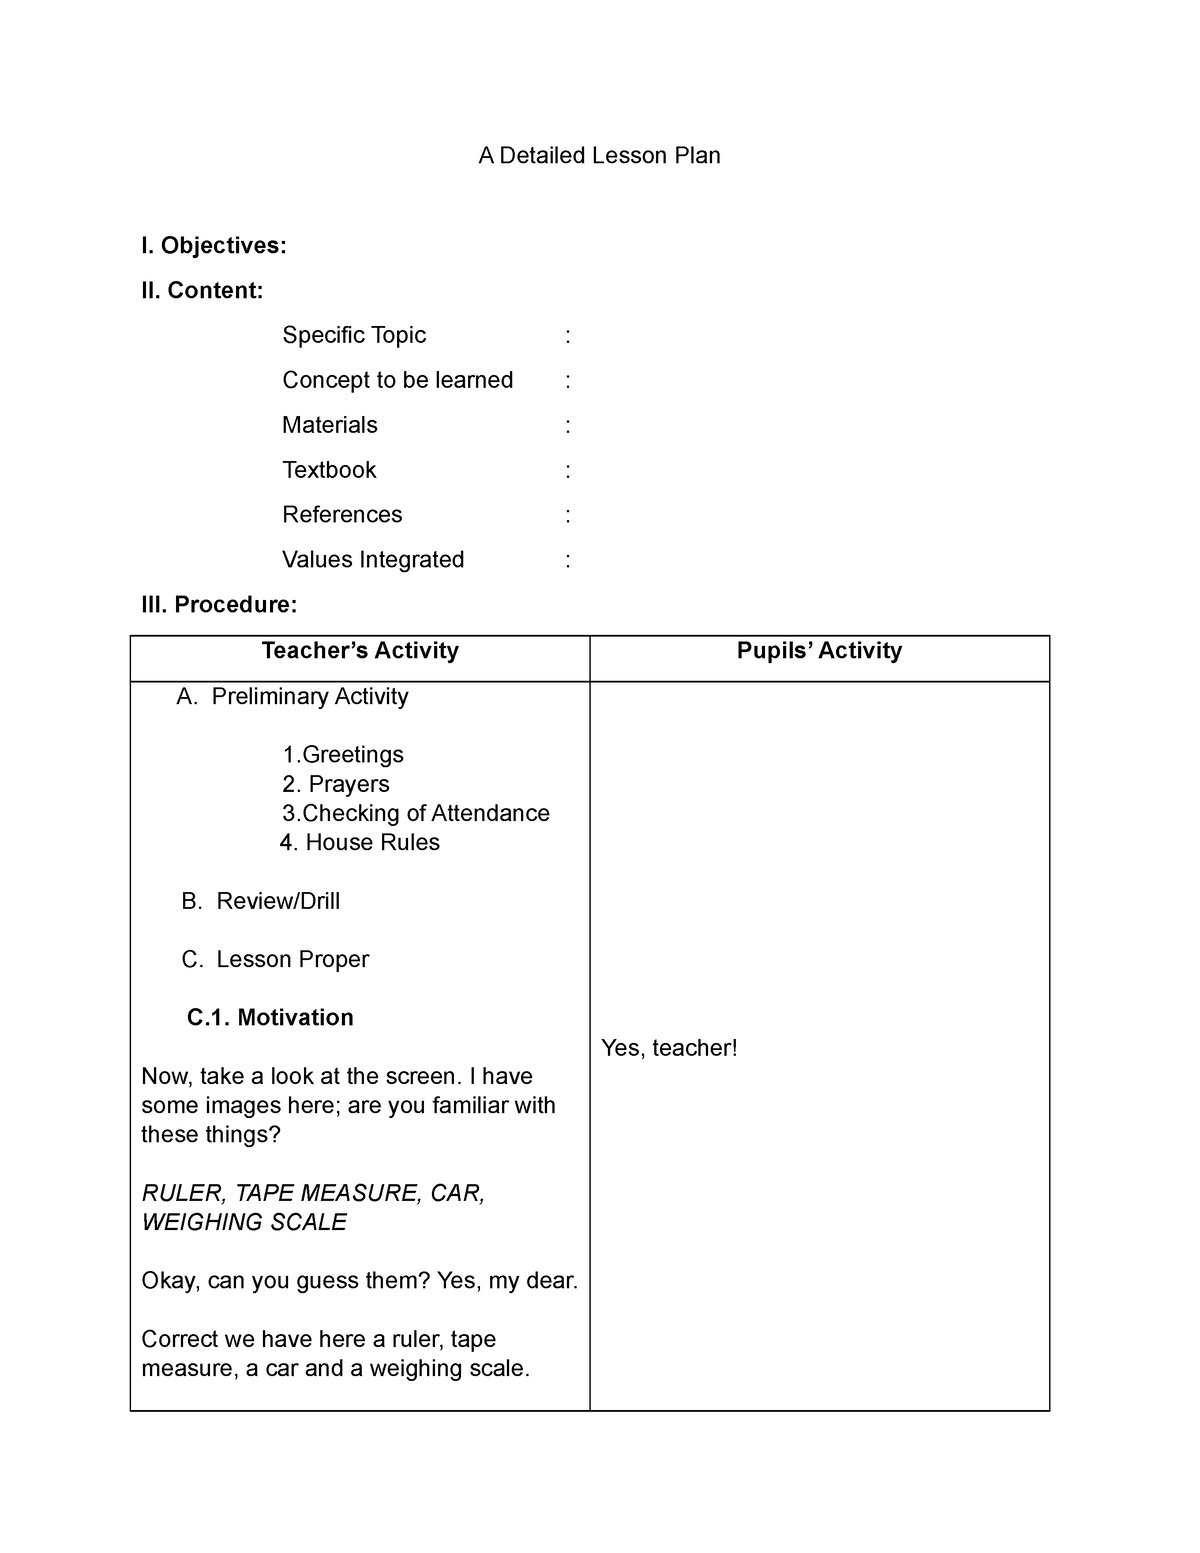 Lesson Proper A Detailed Lesson Plan I Objectives II Content 